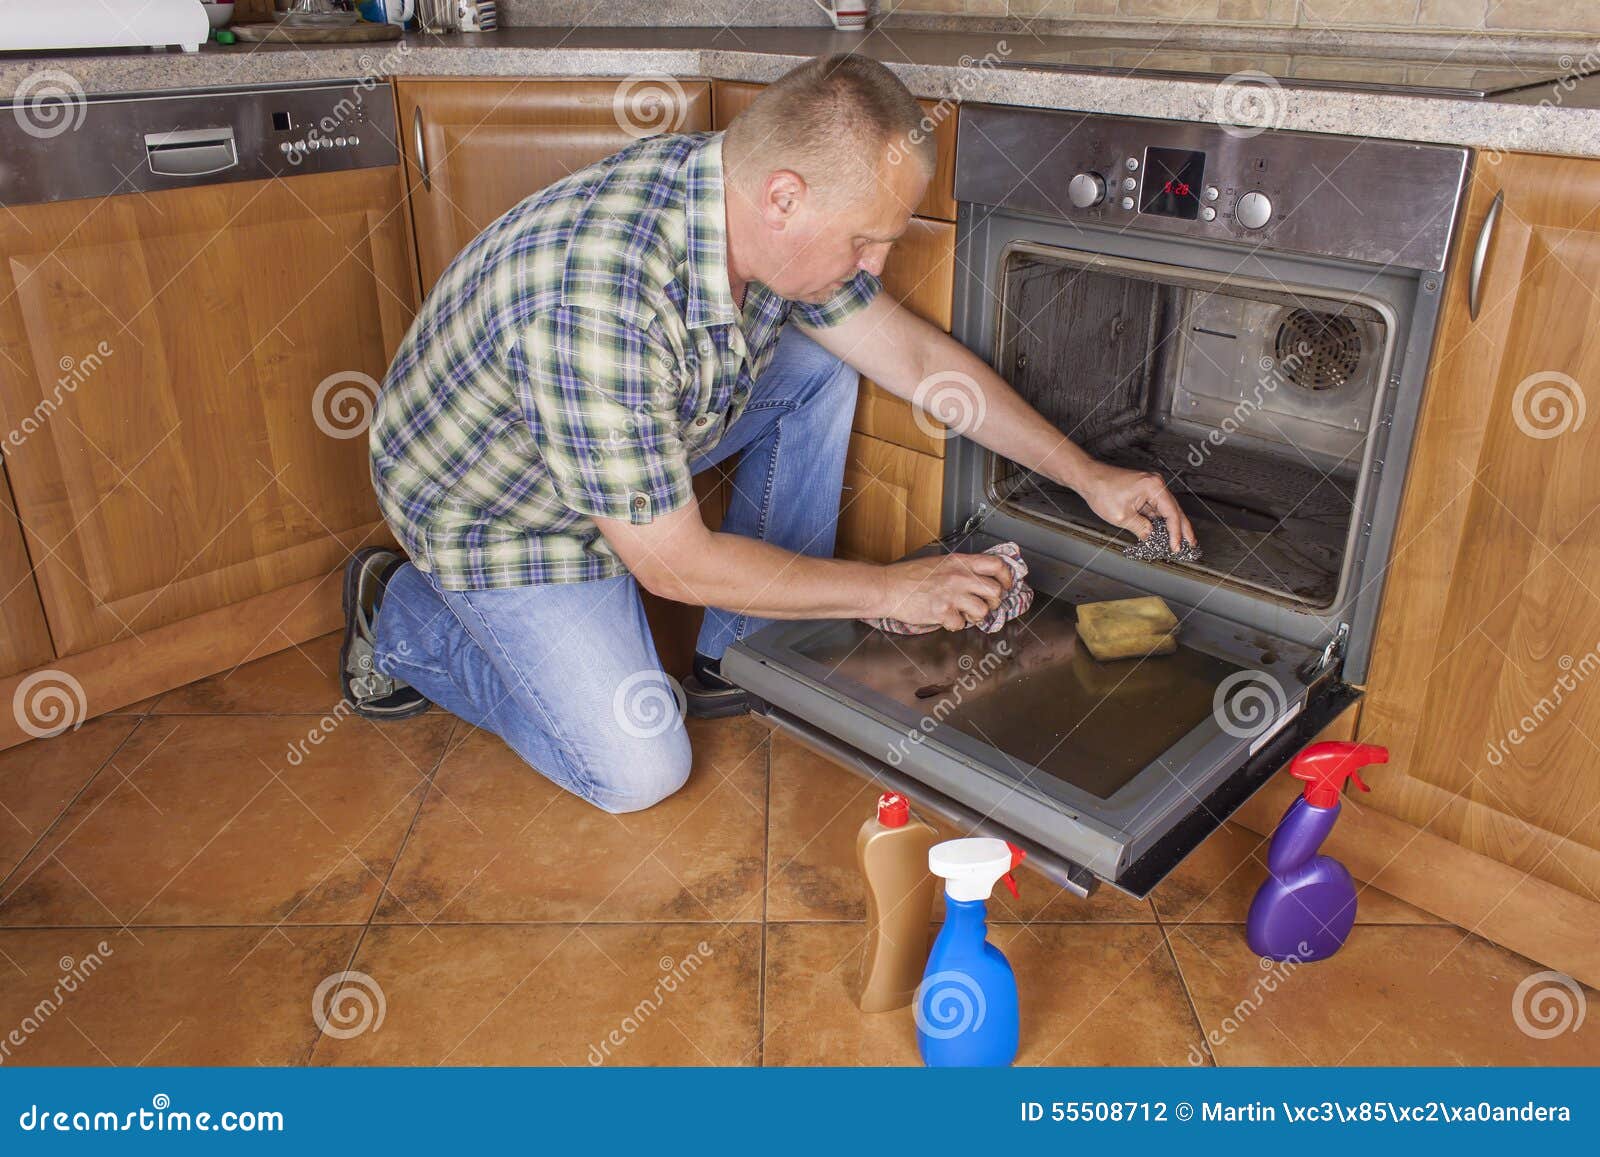 Man Kneels On The Floor In The Kitchen And Cleans The Oven 